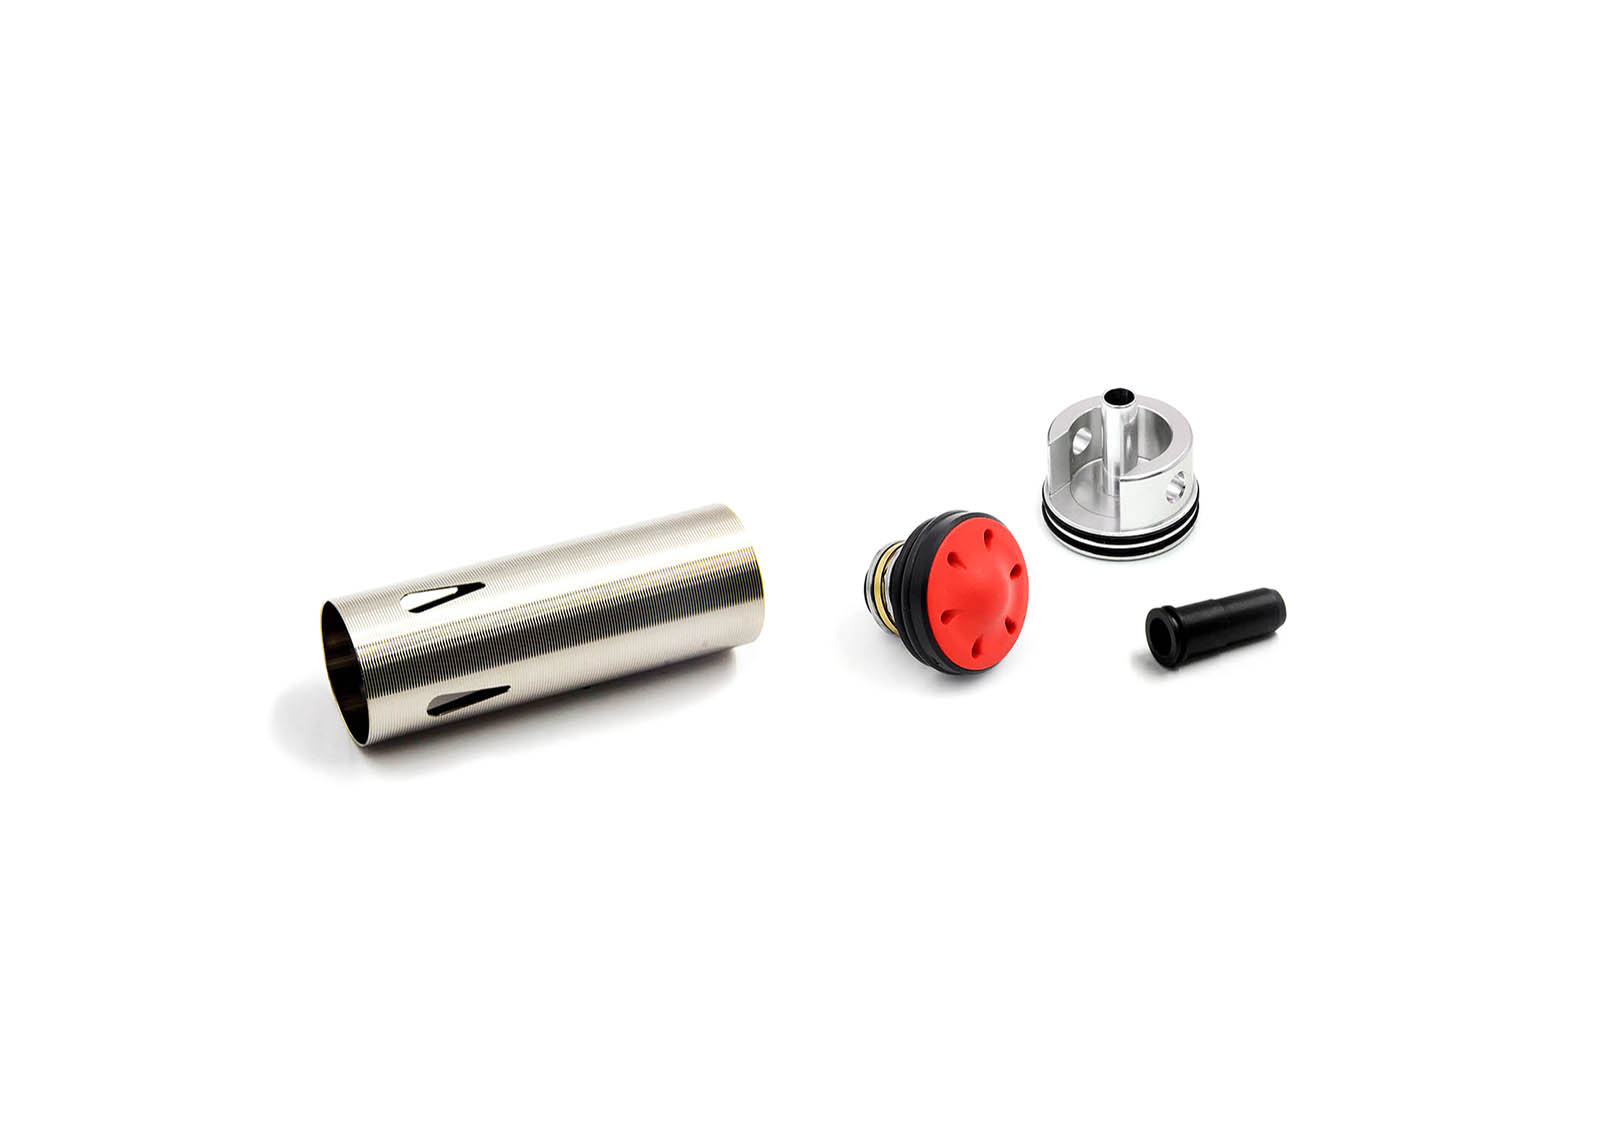 Bore-Up Cylinder Set for M4-A1/RIS/SR16 (CA Type) - Modify Airsoft parts